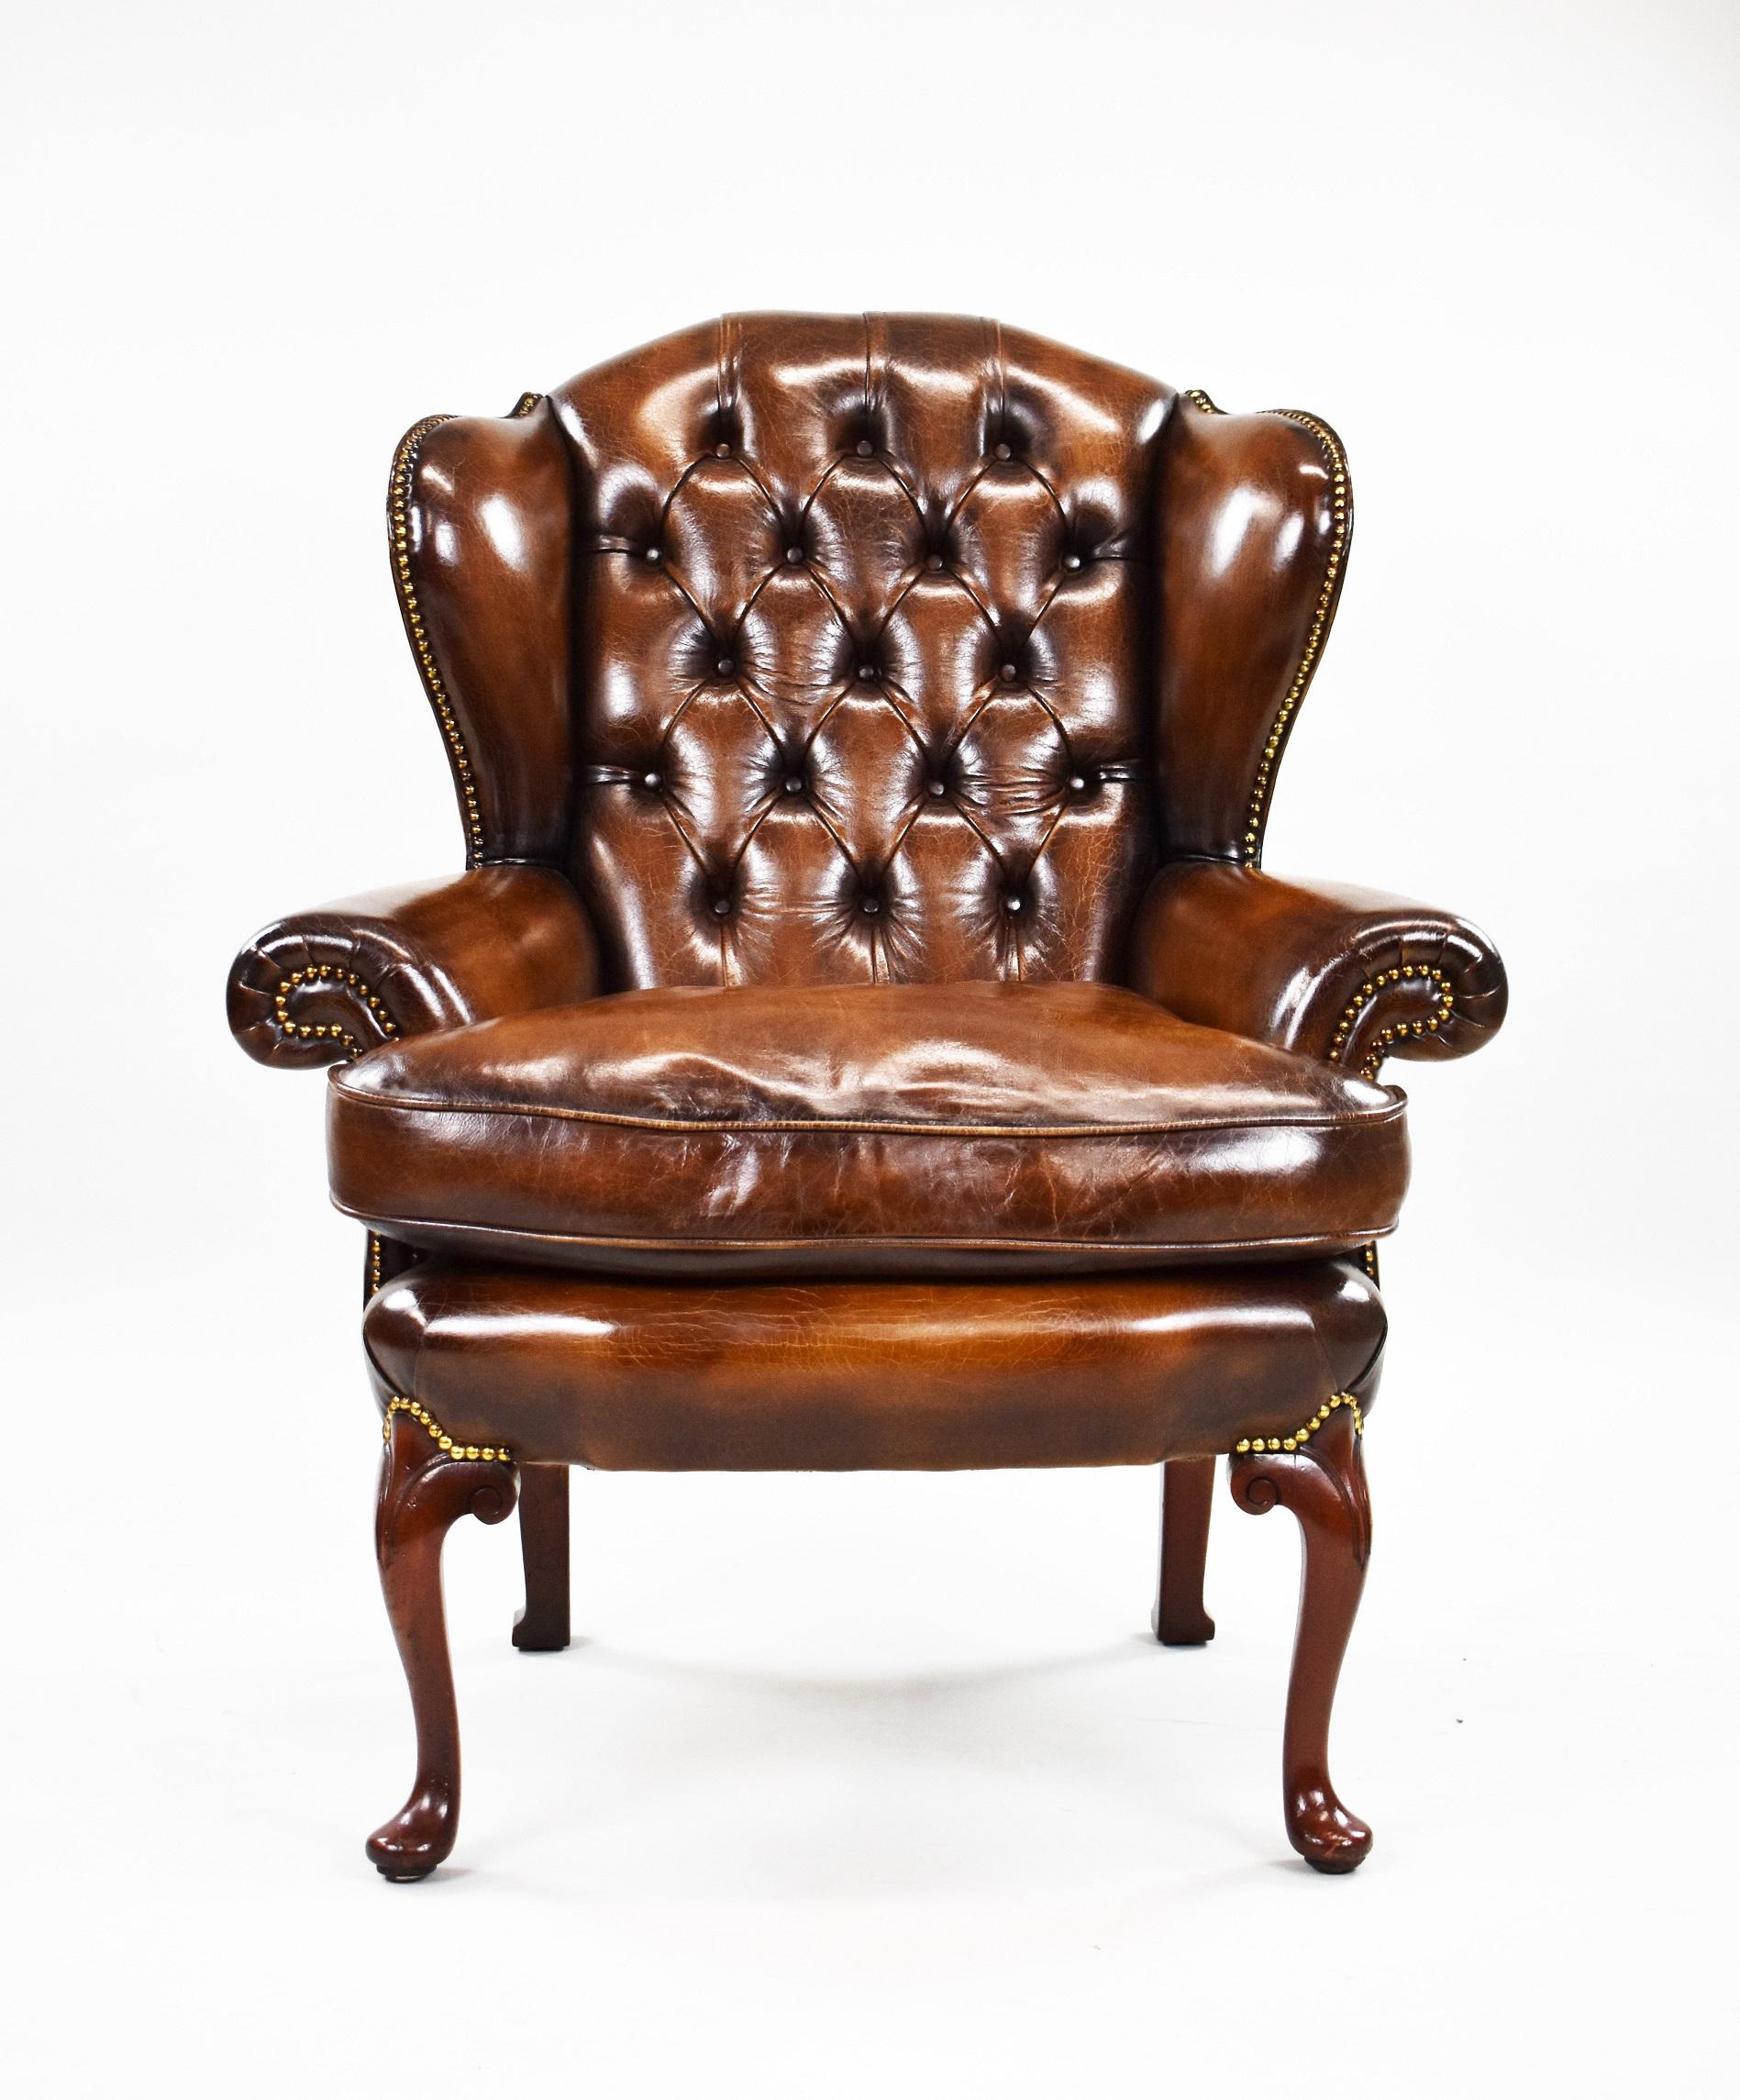 George II style mahogany armchair upholstered in a hand dyed brown leather with a buttoned back with scroll over arms, the chair has close studding to the top, sides and arms. Stands on cabriole legs.